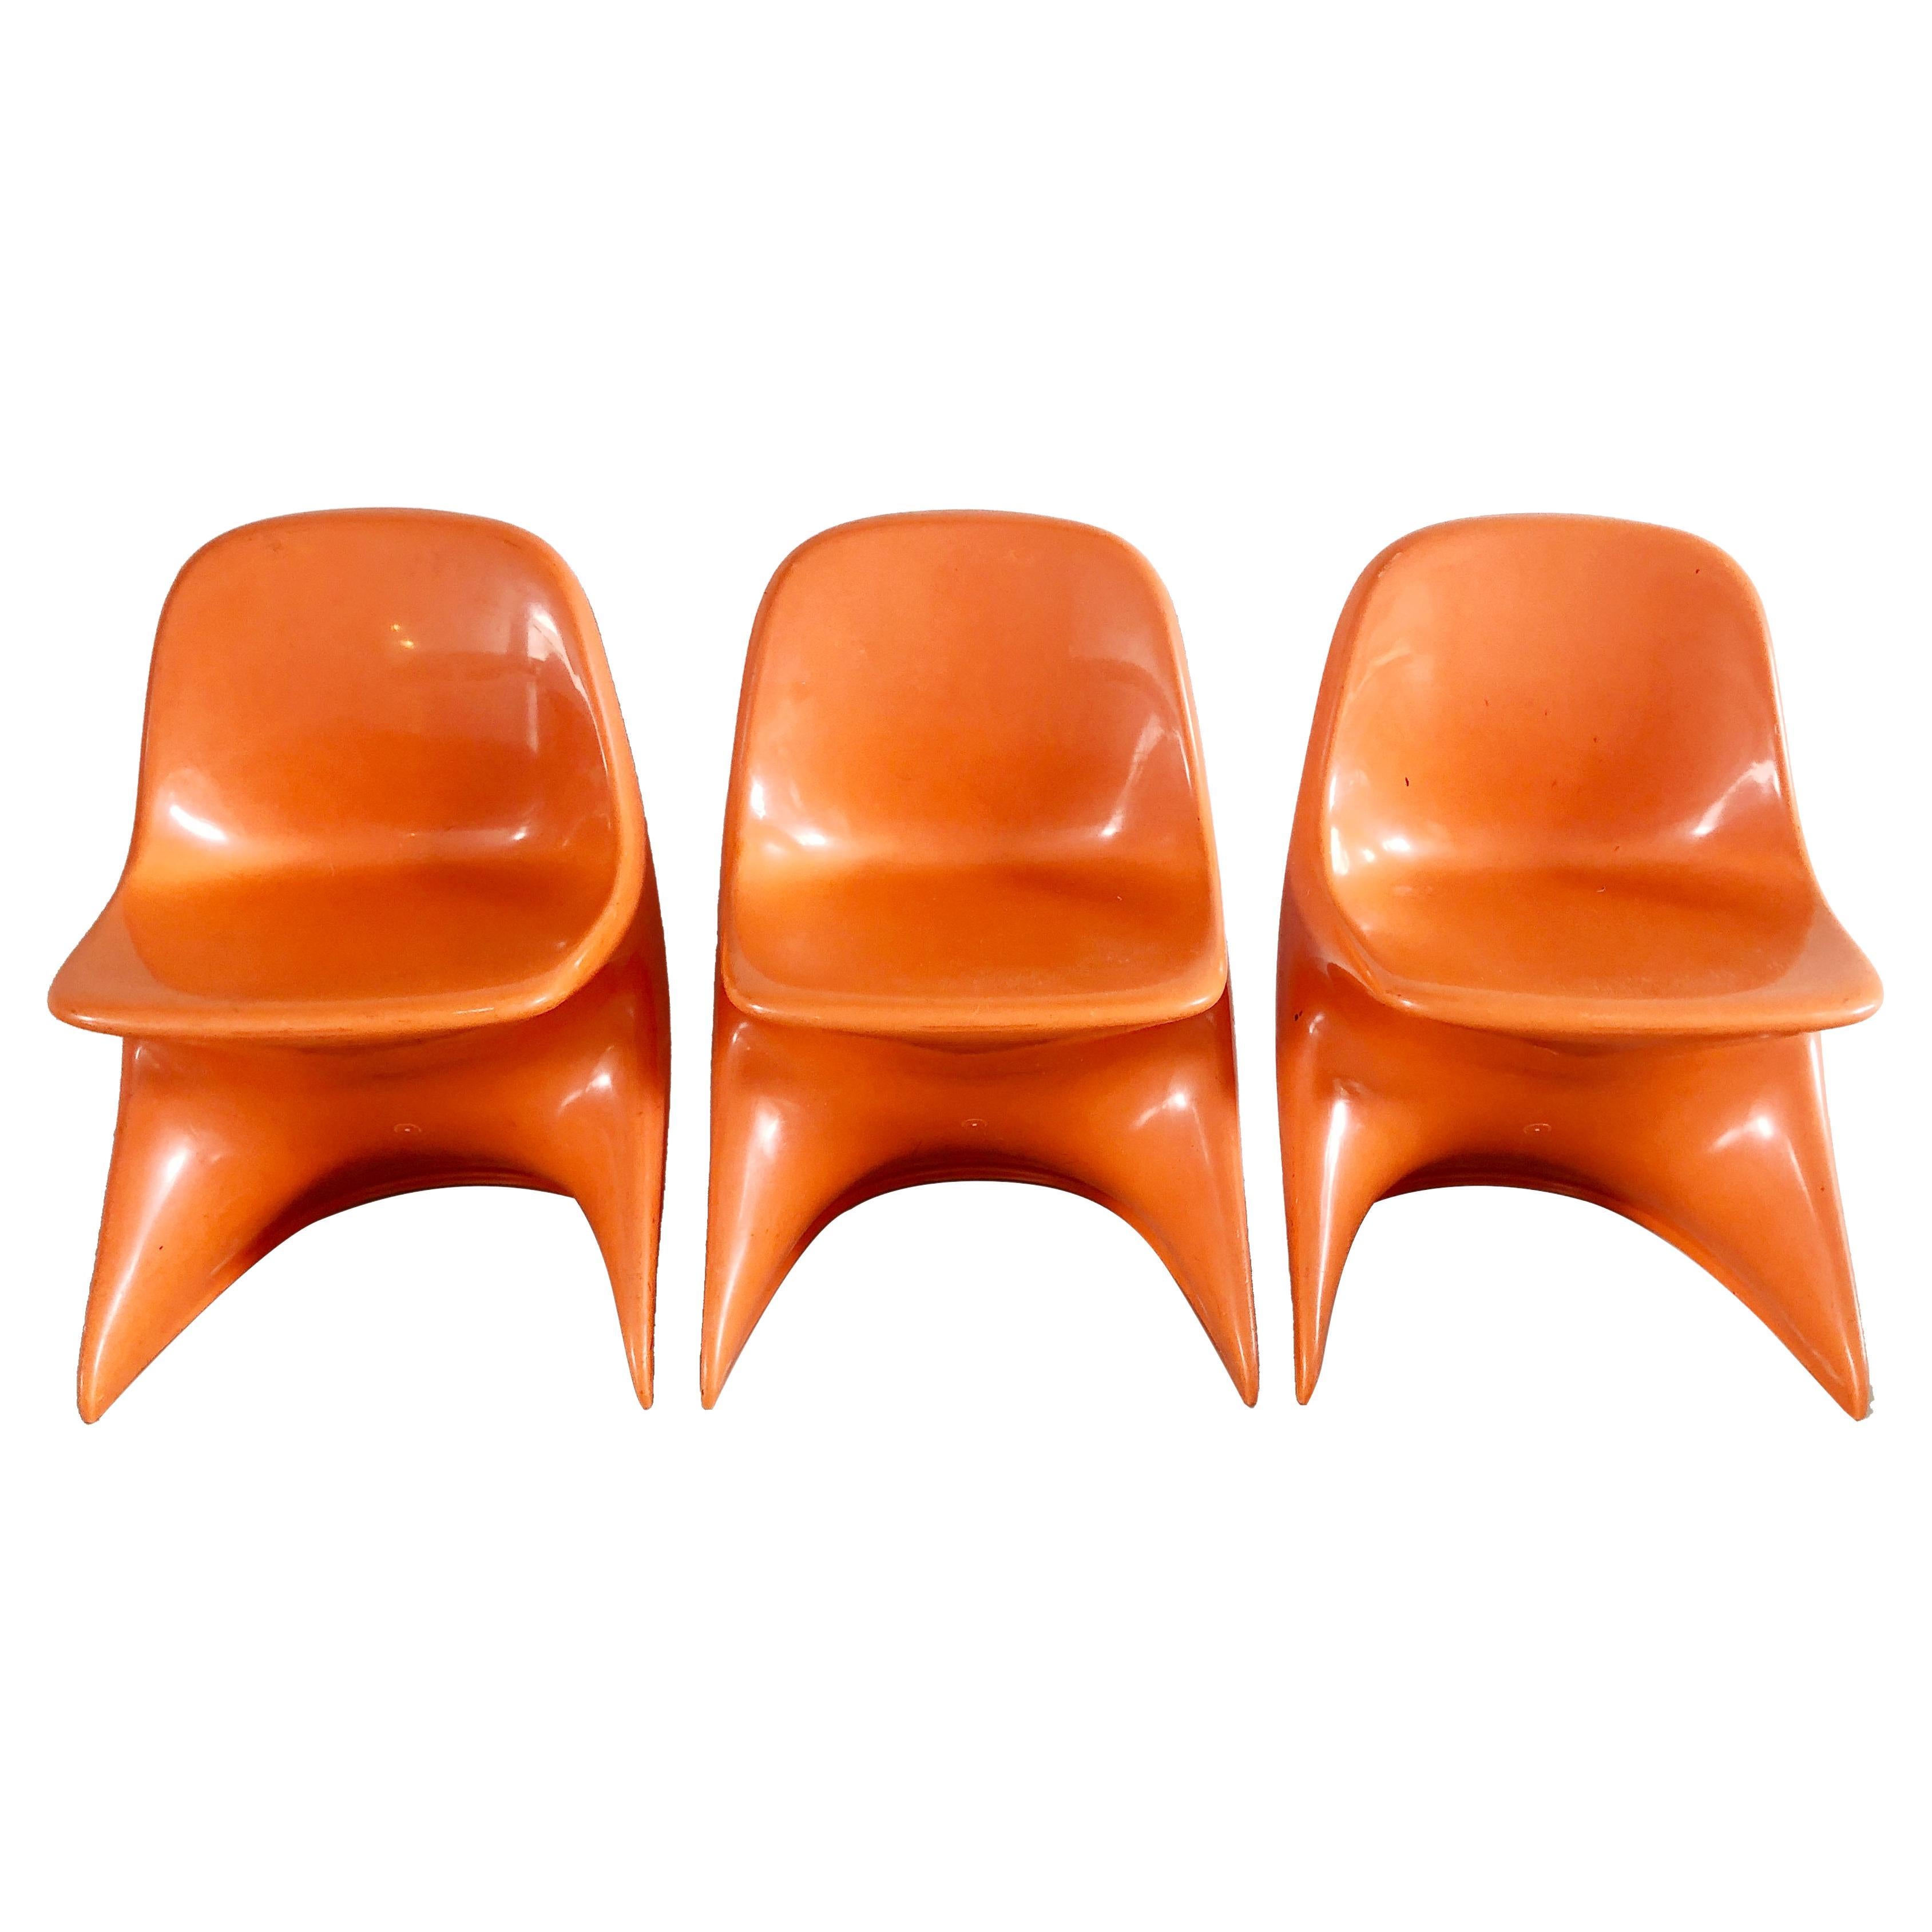 3 Casalino 0 child chairs by Alexander Begge for Casala, Germany, 1975 For Sale